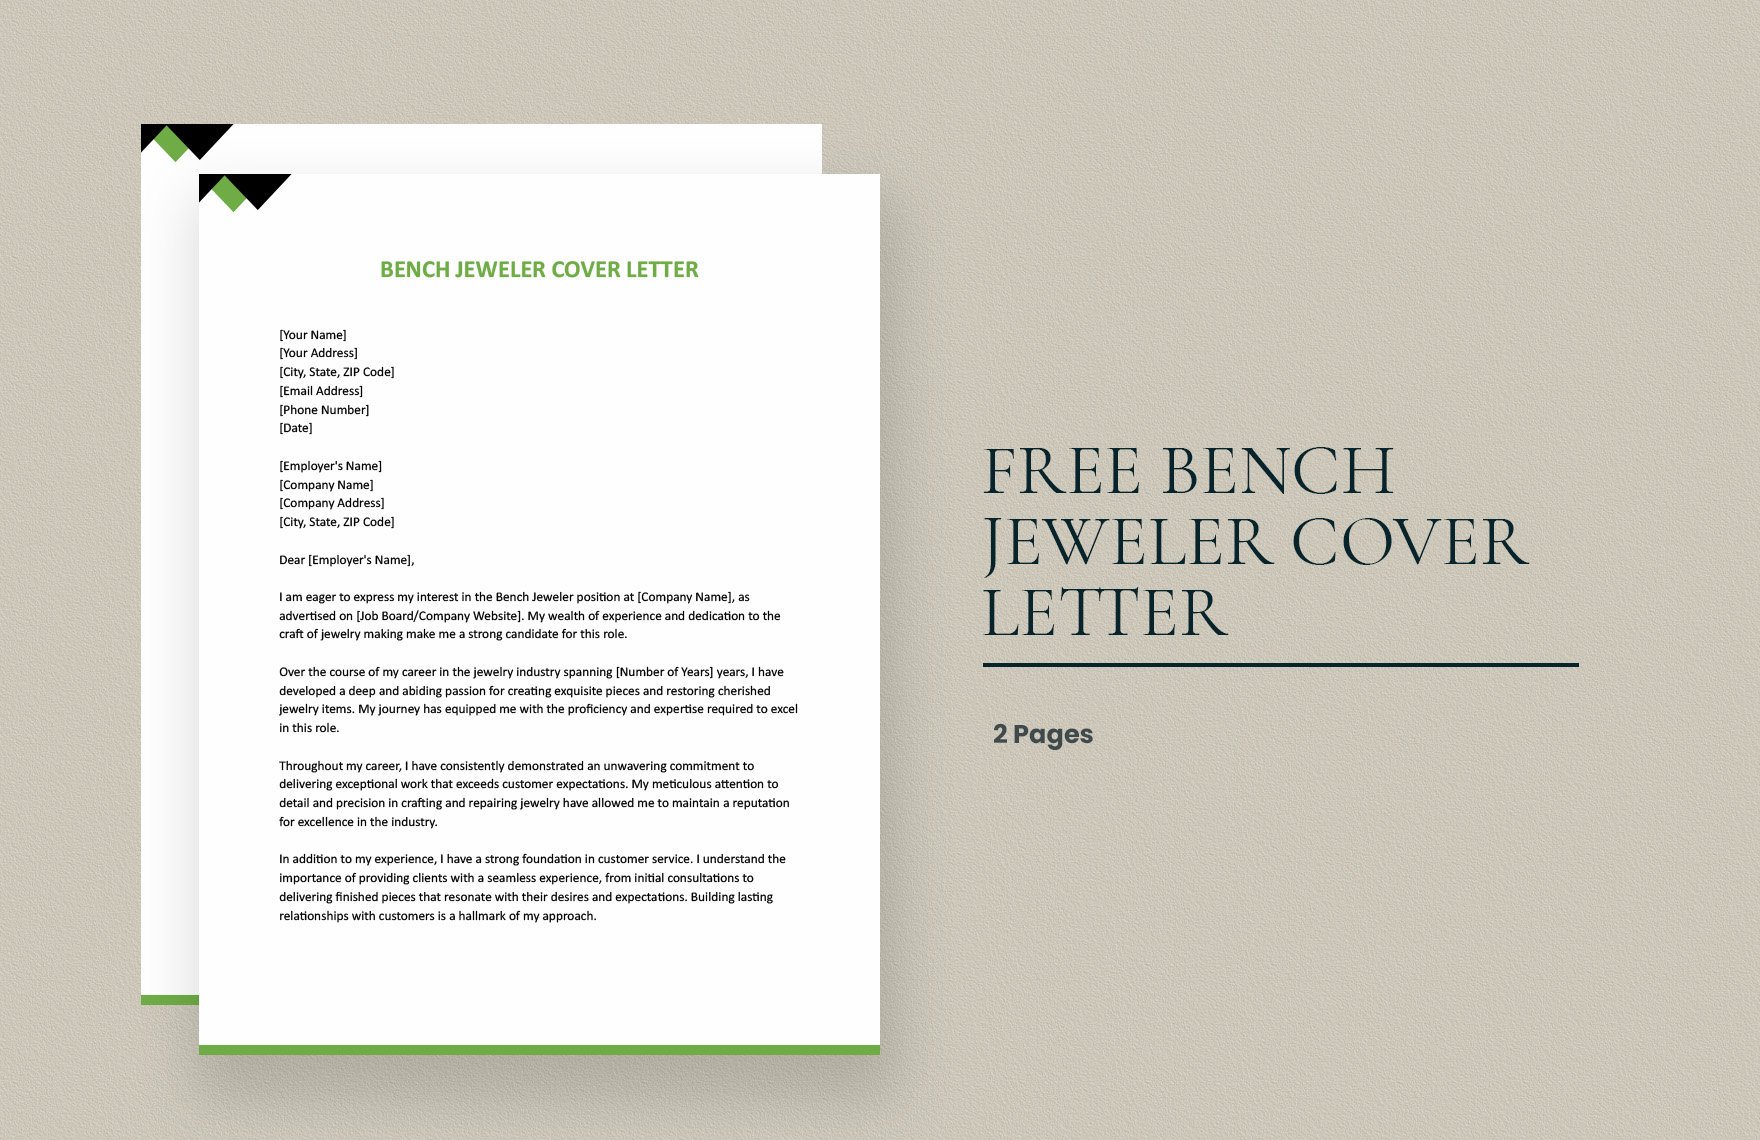 Bench Jeweler Cover Letter